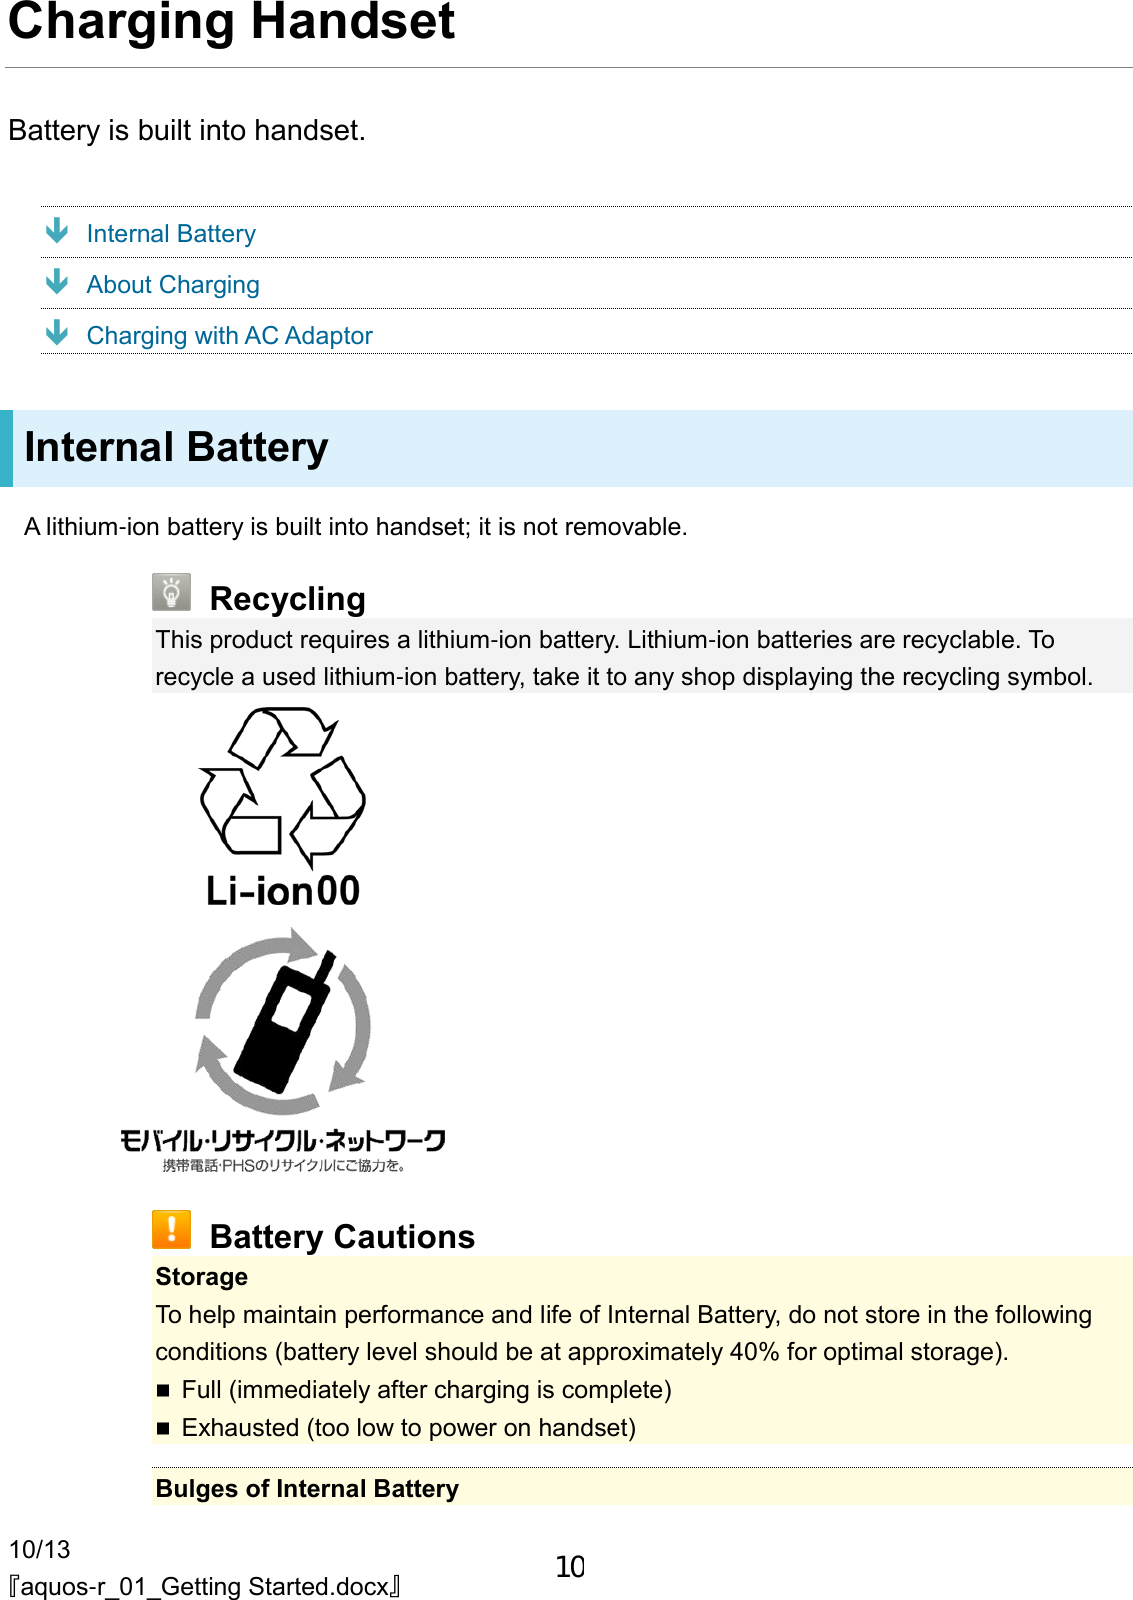 10/13 『aquos-r_01_Getting Started.docx』 Charging Handset Battery is built into handset.  Internal Battery  About Charging  Charging with AC Adaptor Internal Battery A lithium-ion battery is built into handset; it is not removable.  Recycling This product requires a lithium-ion battery. Lithium-ion batteries are recyclable. To recycle a used lithium-ion battery, take it to any shop displaying the recycling symbol.    Battery Cautions Storage To help maintain performance and life of Internal Battery, do not store in the following conditions (battery level should be at approximately 40% for optimal storage).  Full (immediately after charging is complete)  Exhausted (too low to power on handset)  Bulges of Internal Battery 10